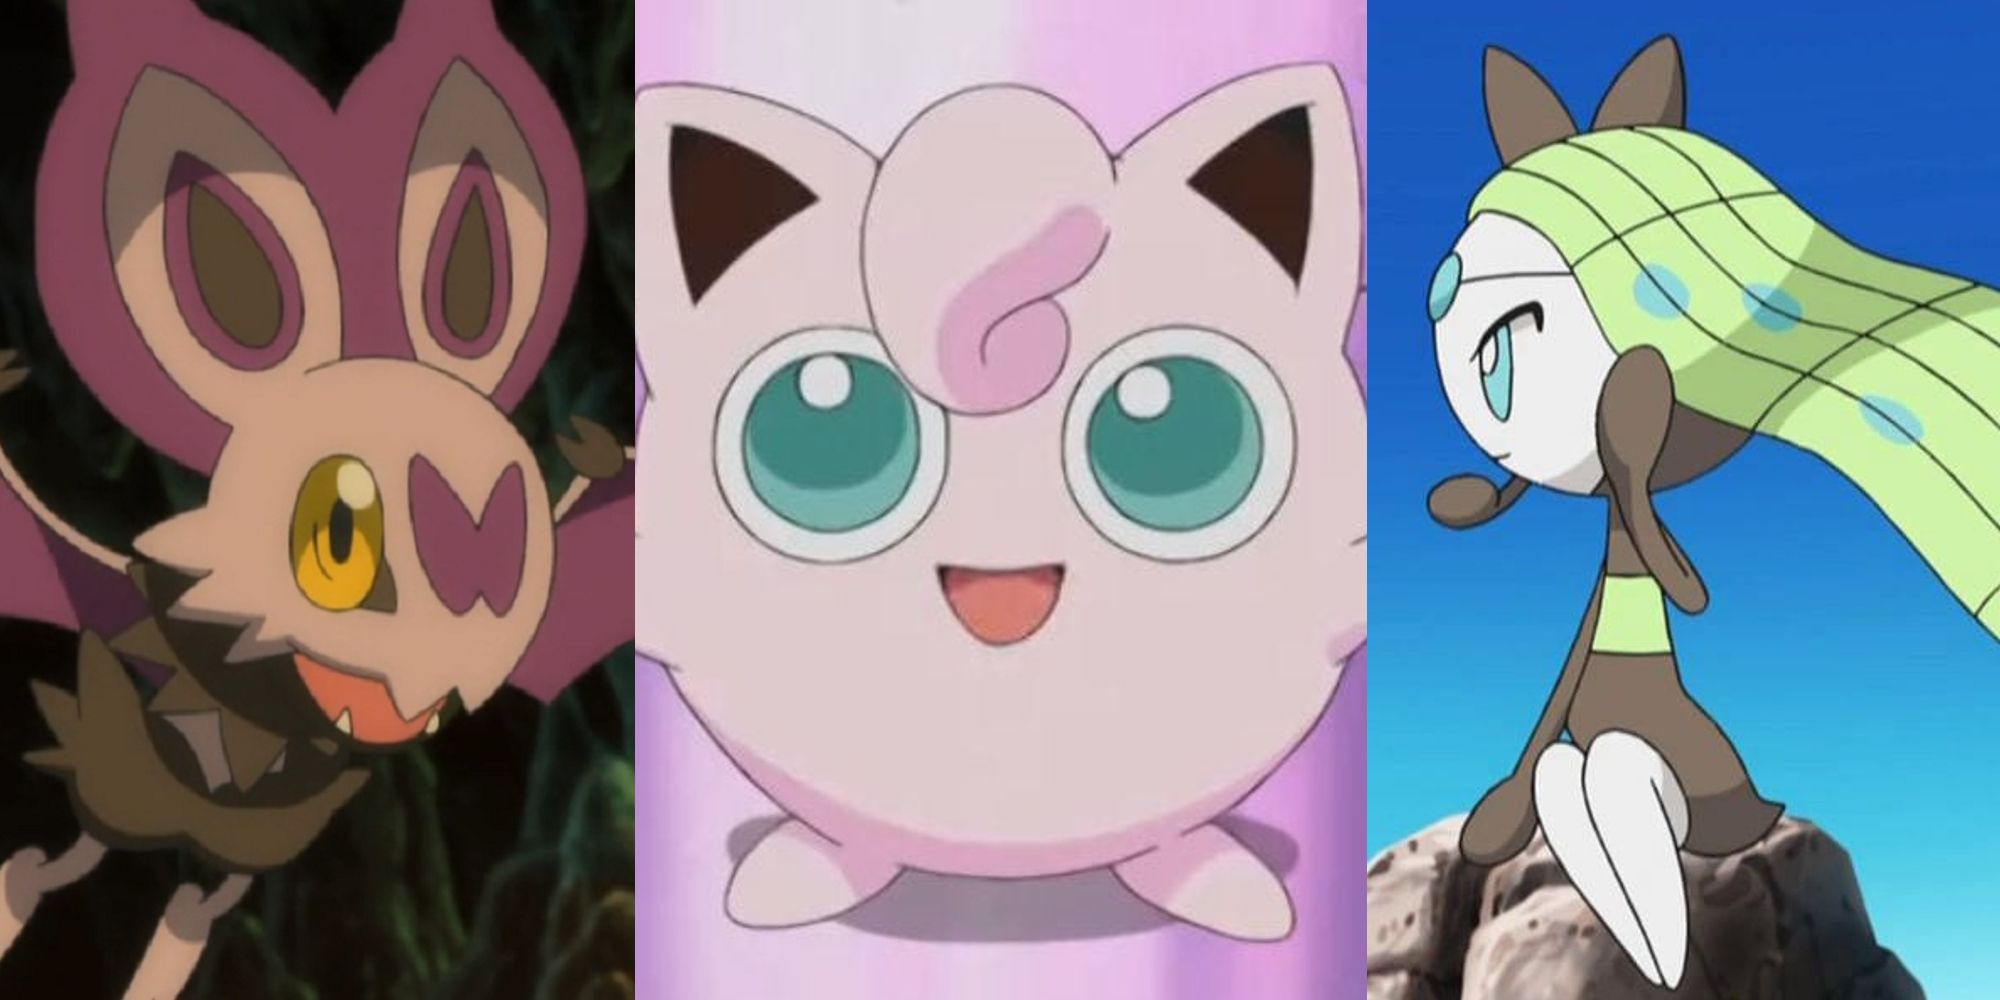 Noibat flying in the anime; Jigglypuff with its microphone in the anime; Meloetta sitting on a rock in the anime